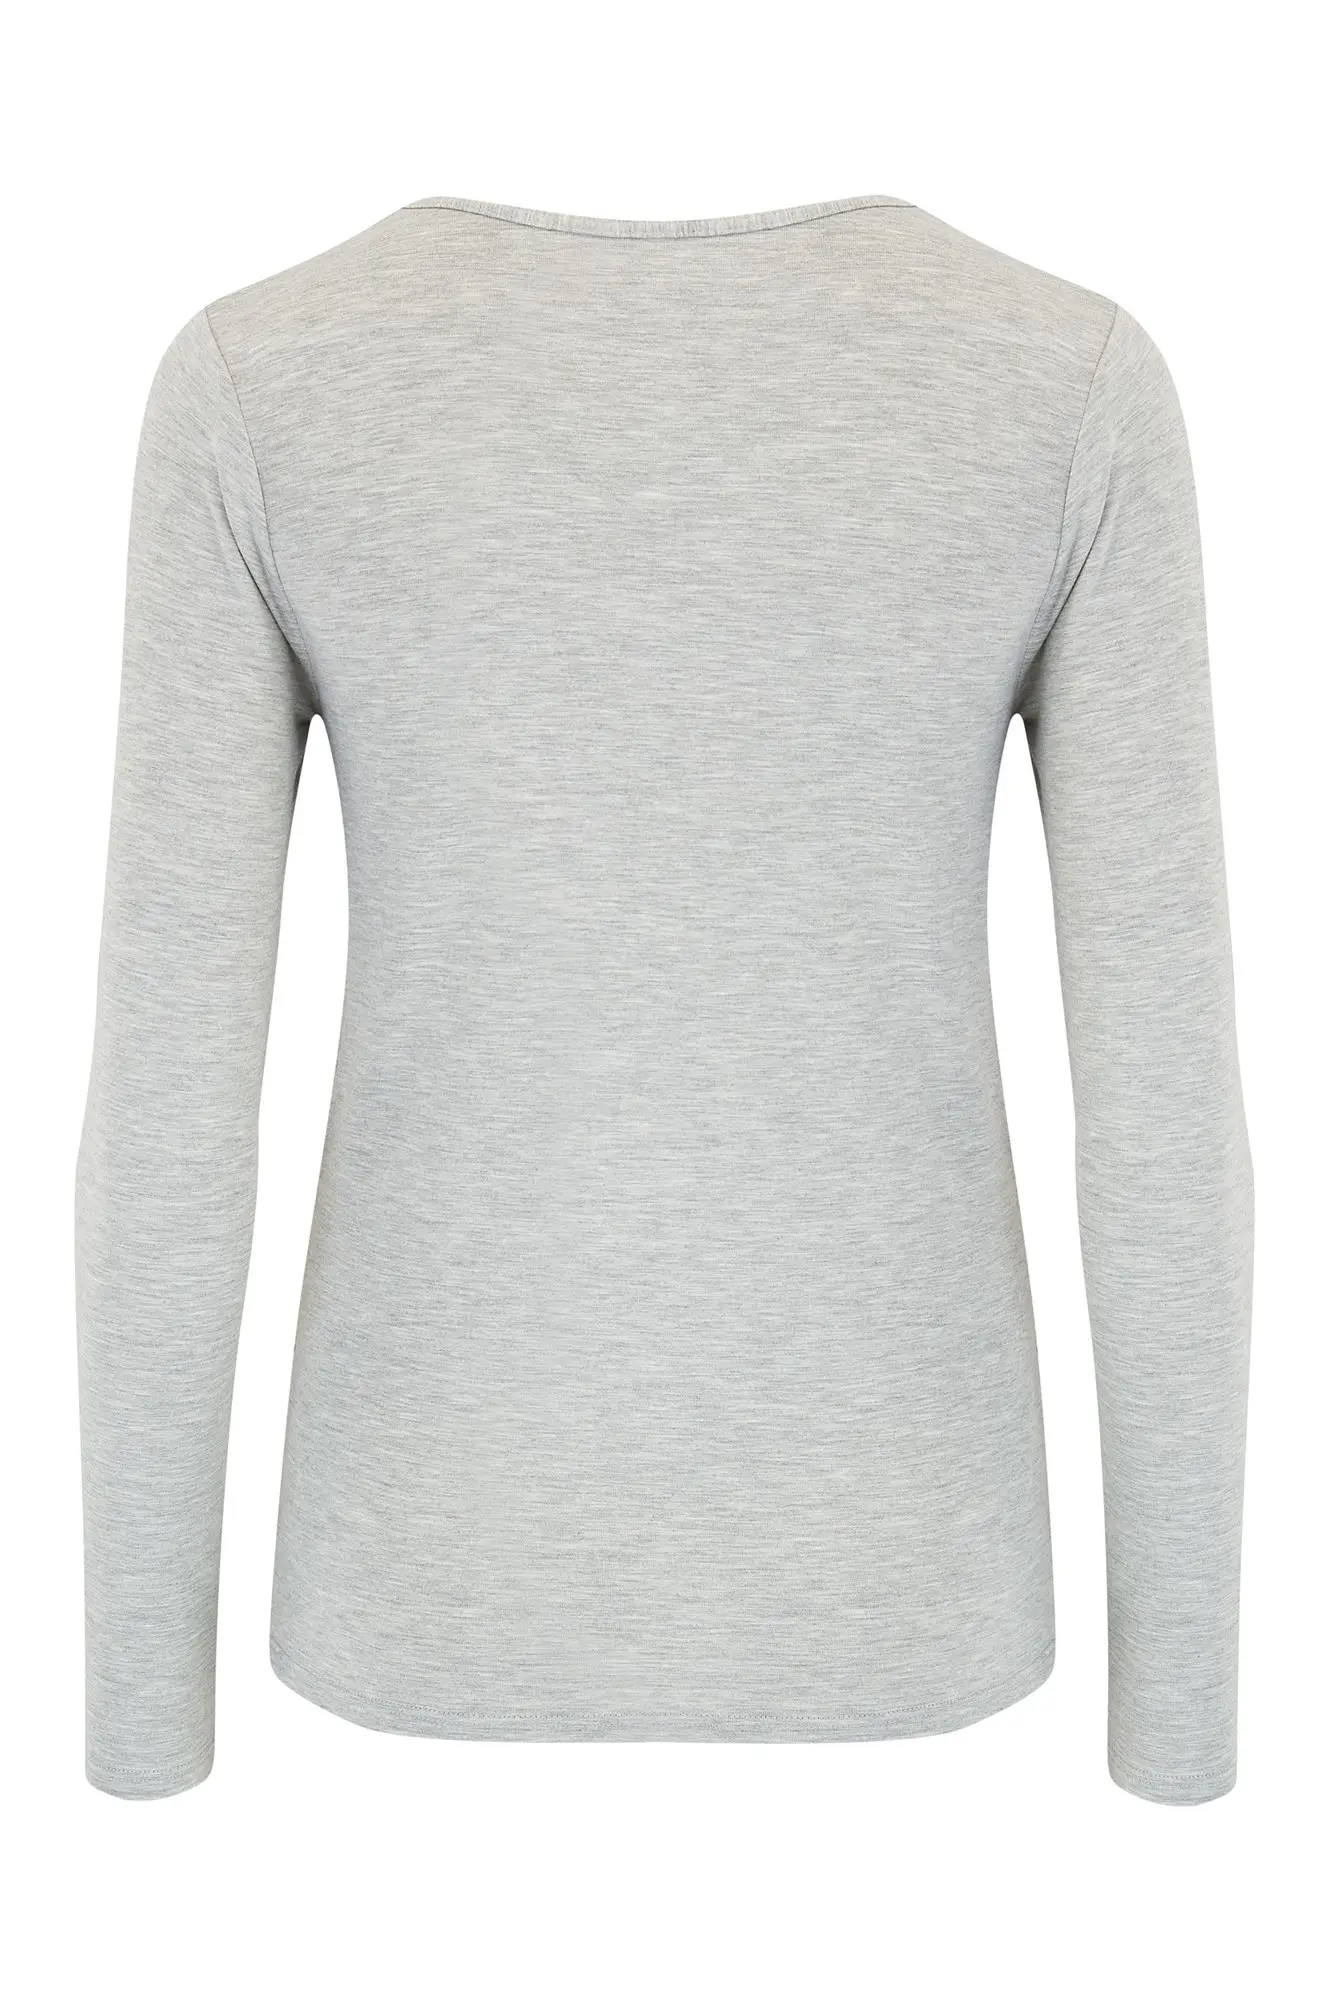 Charnos Second Skin Thermal Long Sleeve Top | Pour Moi | Second Skin ...